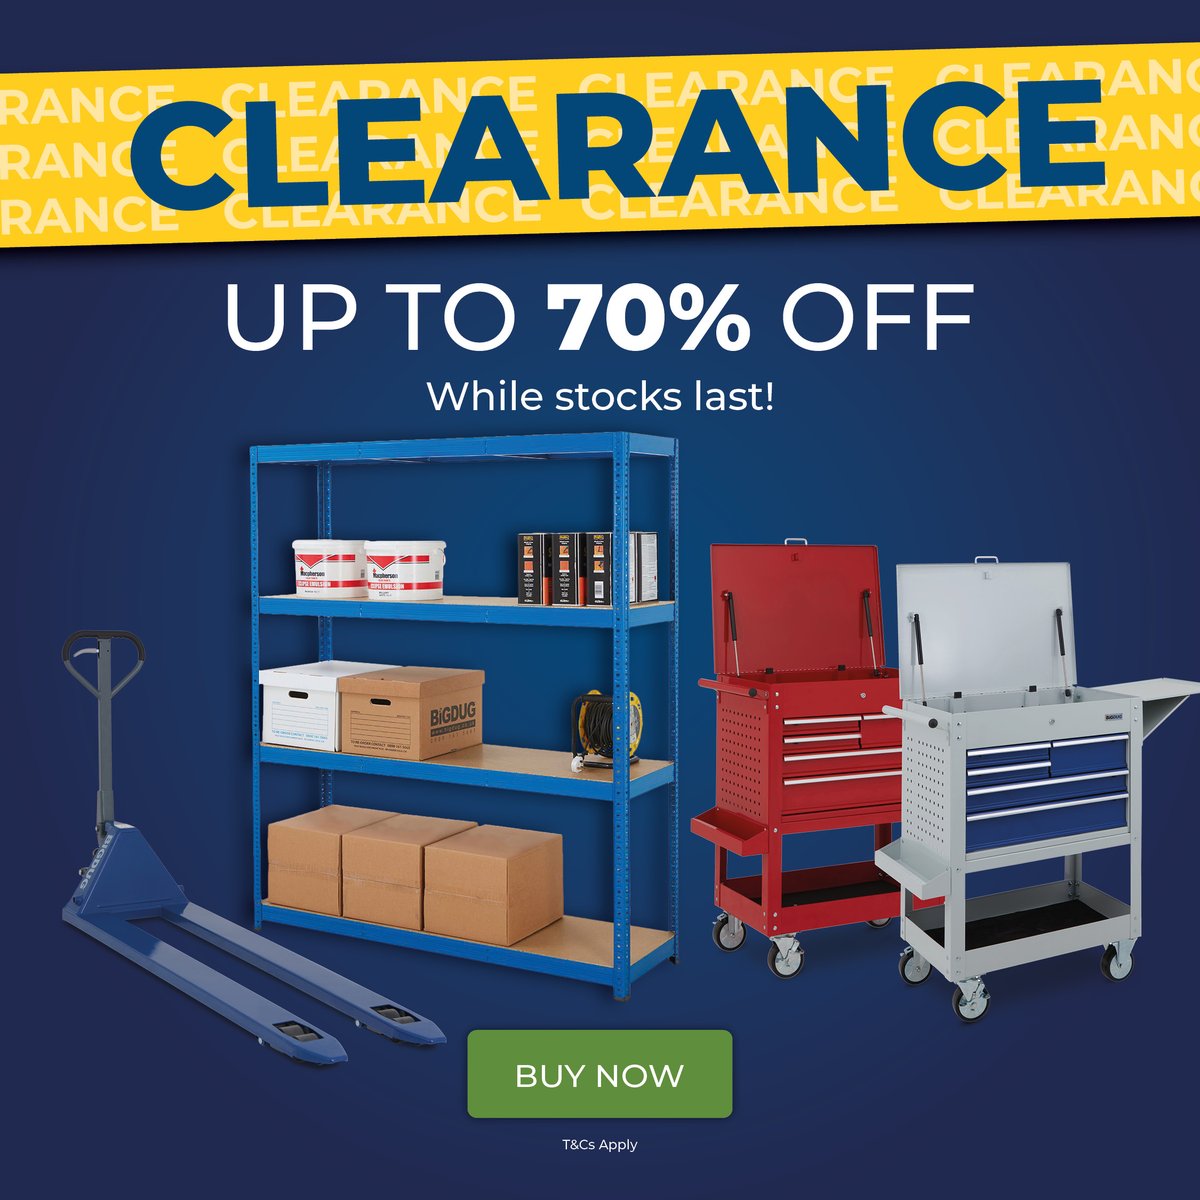 Unbox BiG savings! 📦🤑 Save up to 70% on top clearance lines. From metal storage racks to plastic boxes and containers, find your perfect storage solutions at unbeatable prices. Shop now but be quick – once it’s gone, it’s gone! 🛒: bit.ly/47ZBwxo